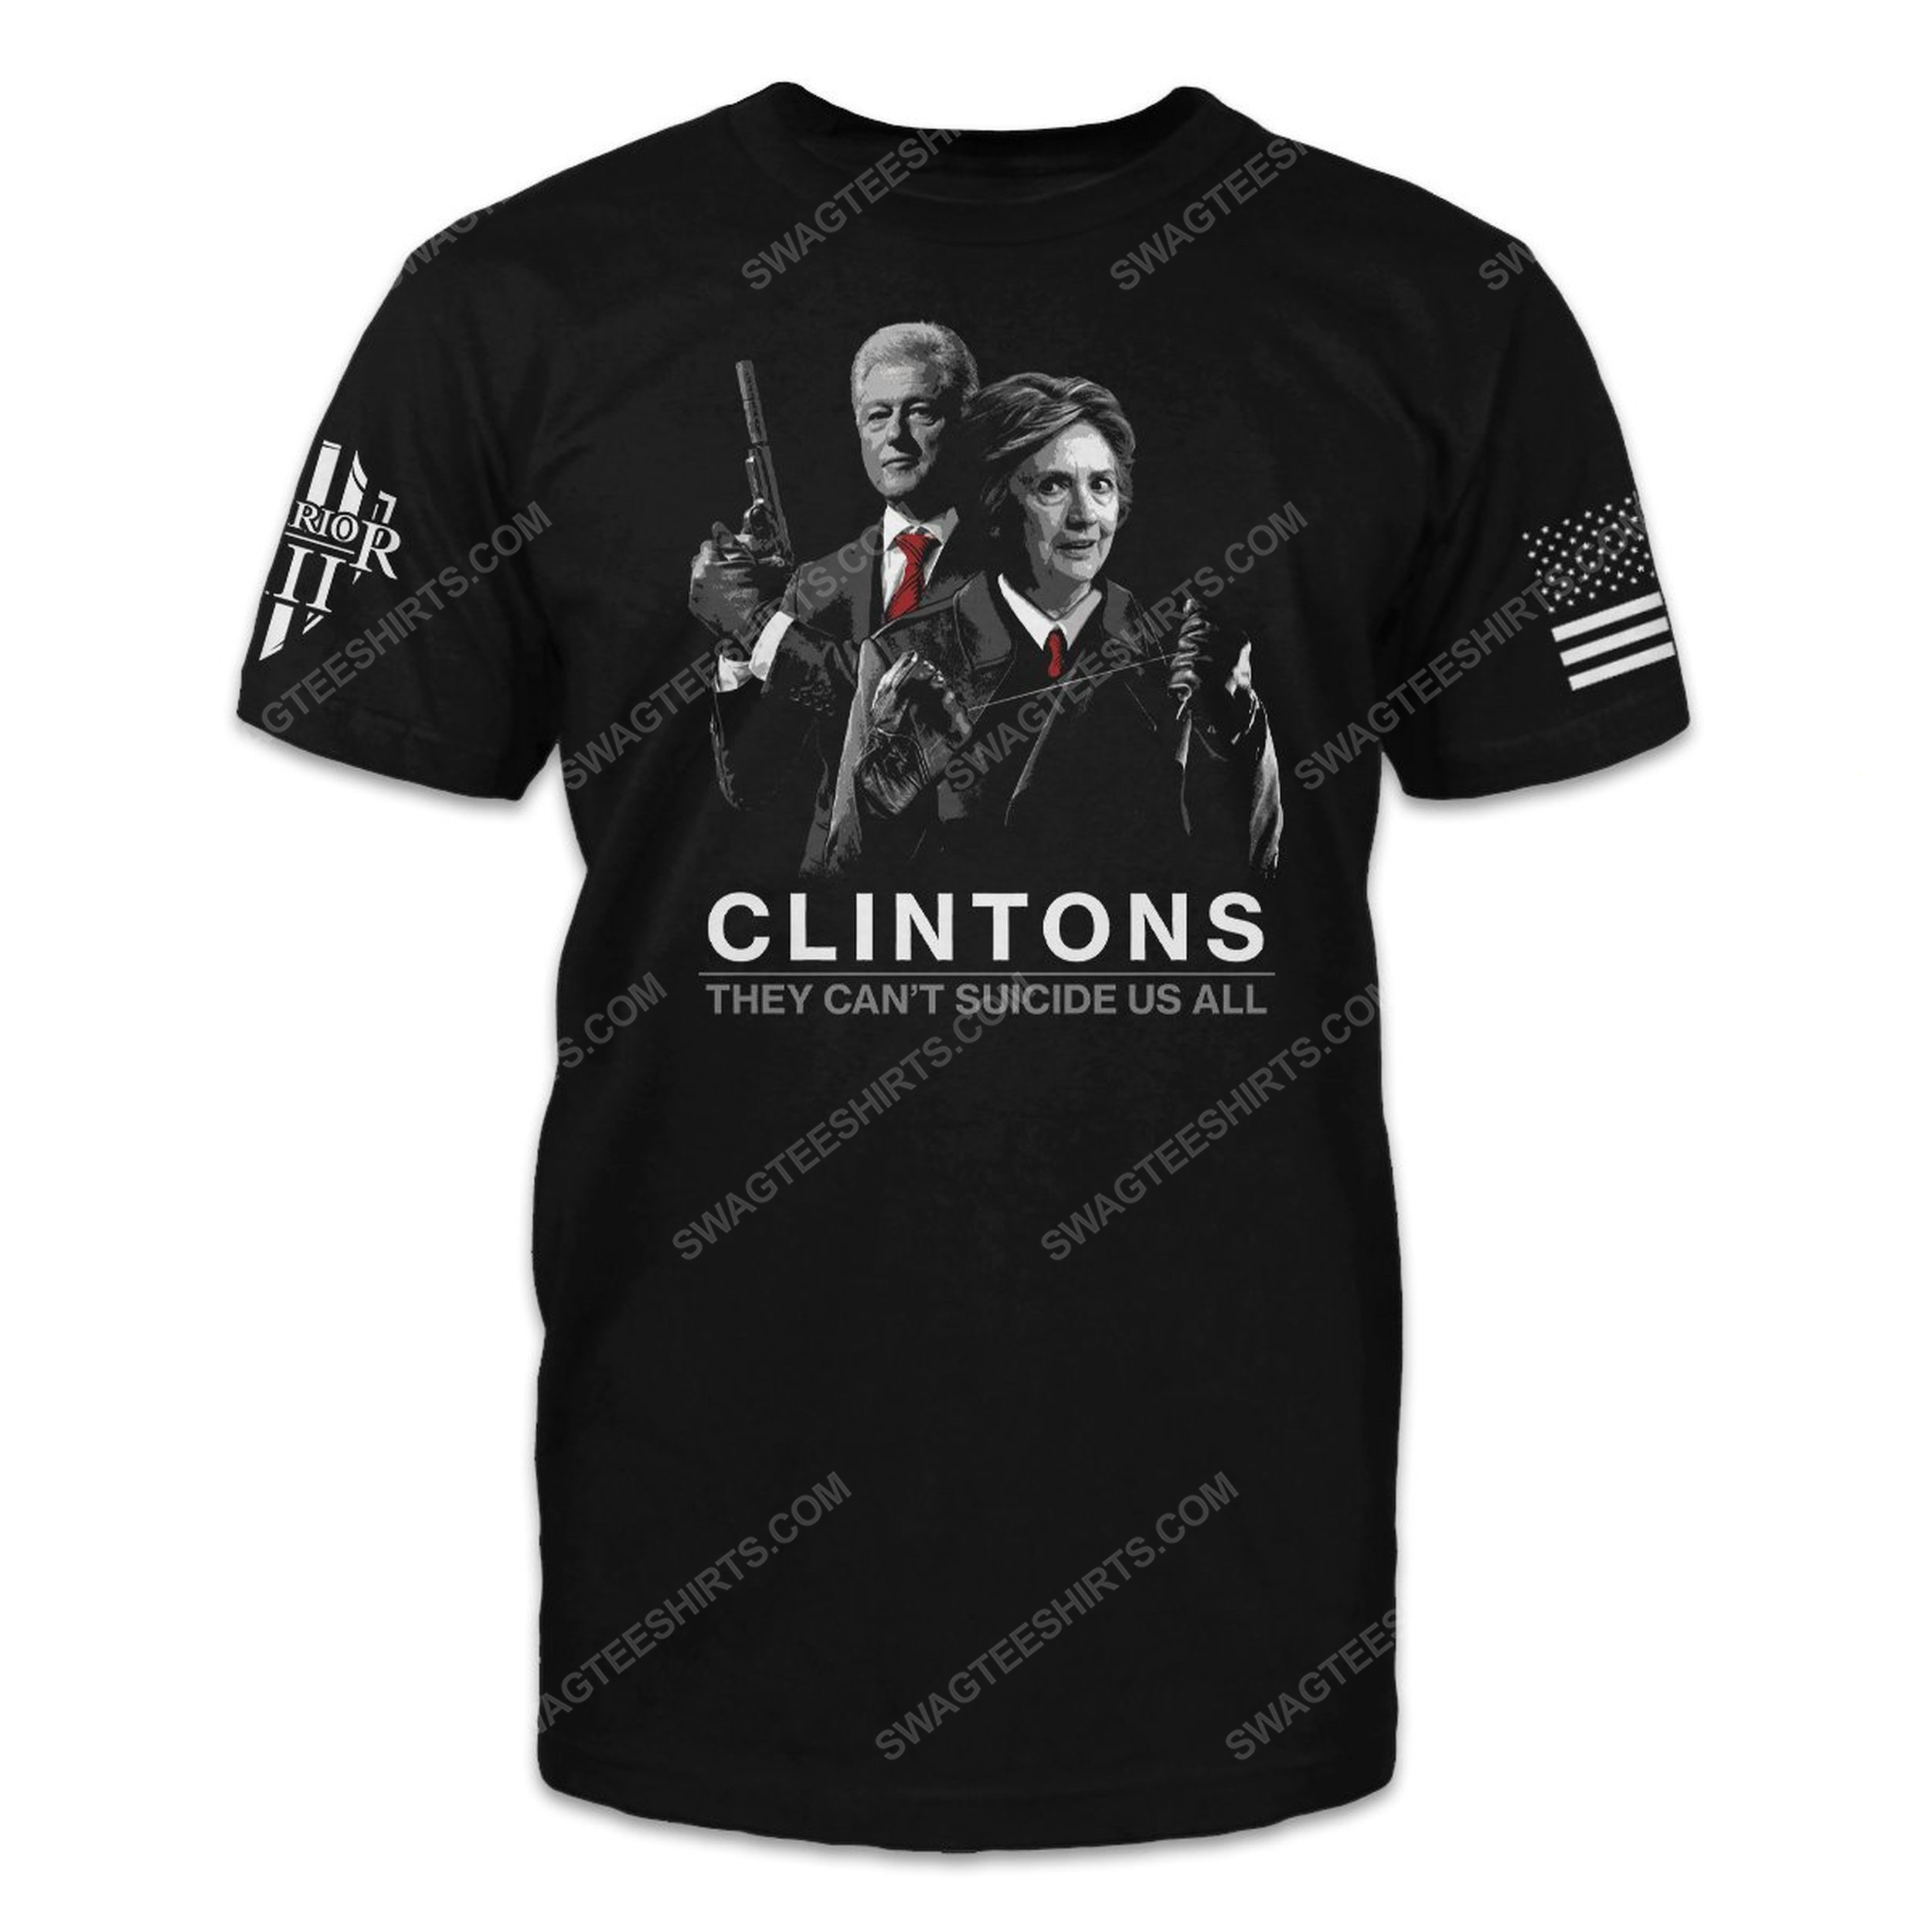 Clintons they can't suicide us all shirt 2(1)